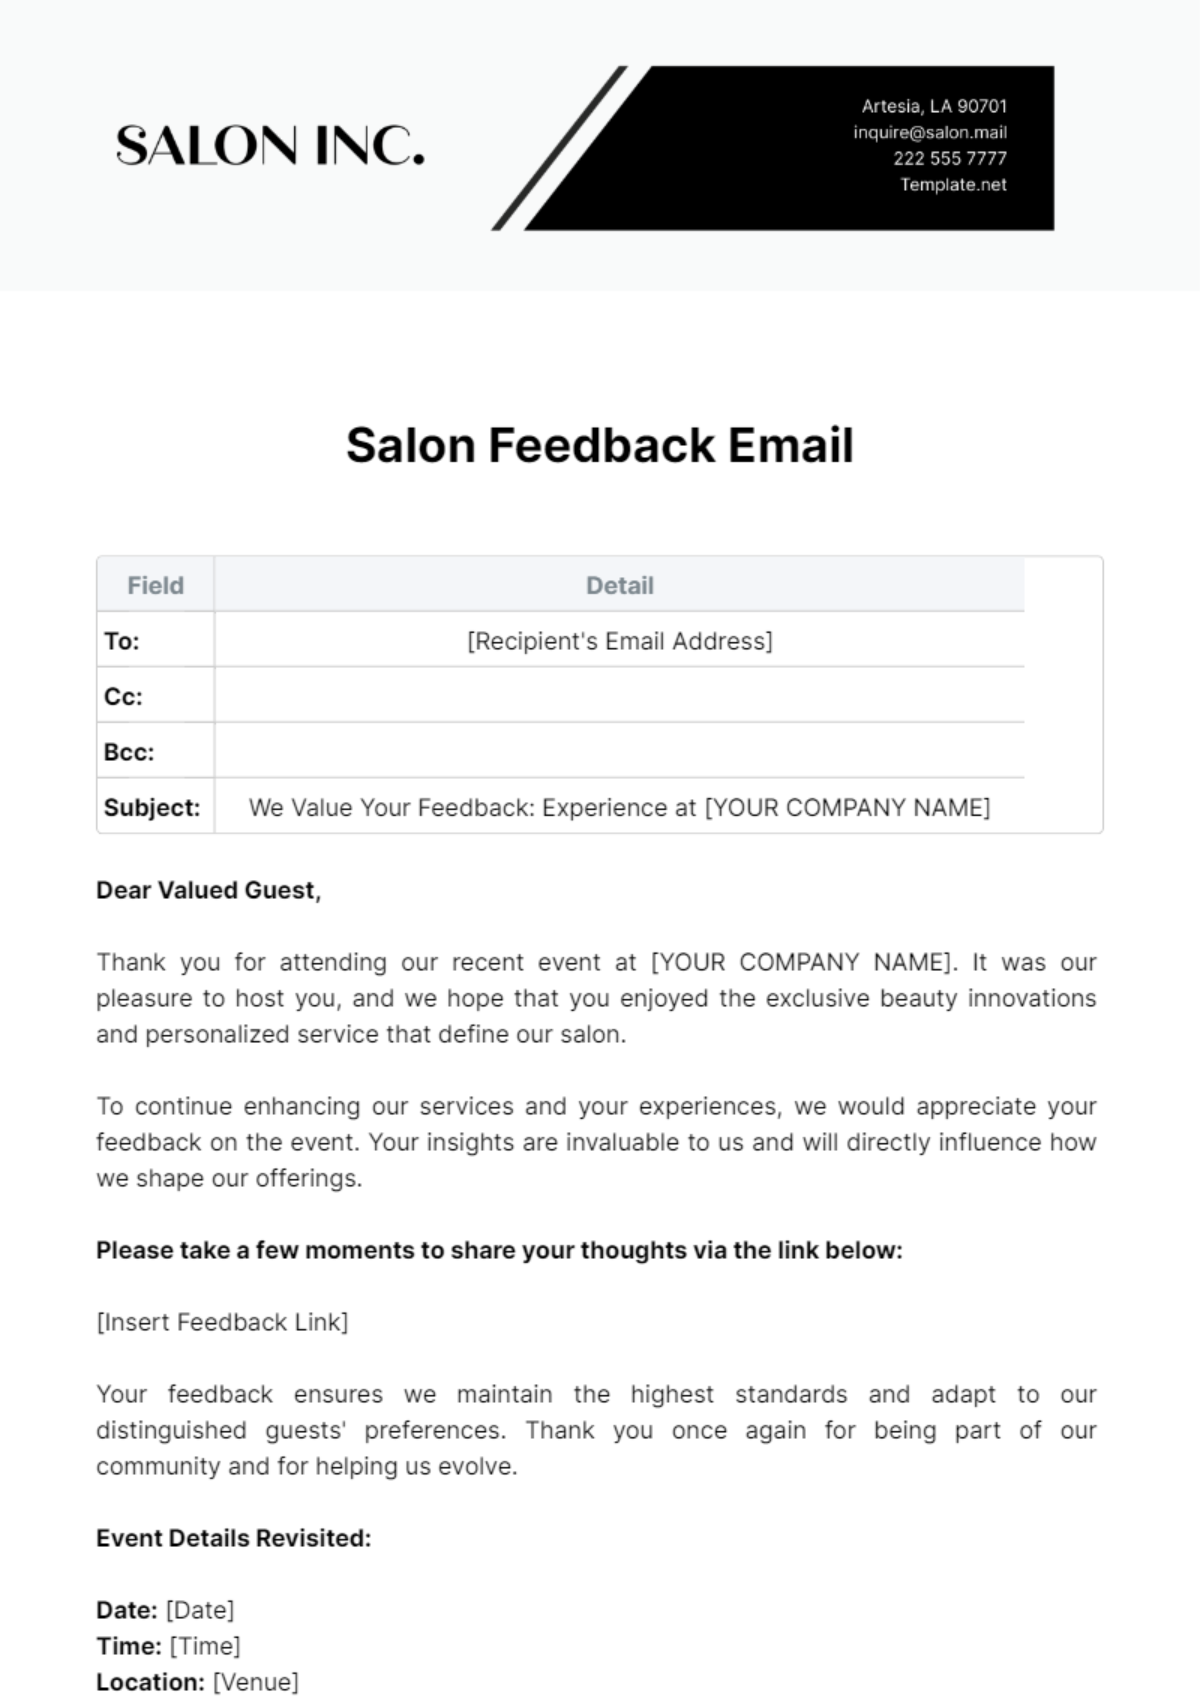 Salon Feedback Email Template